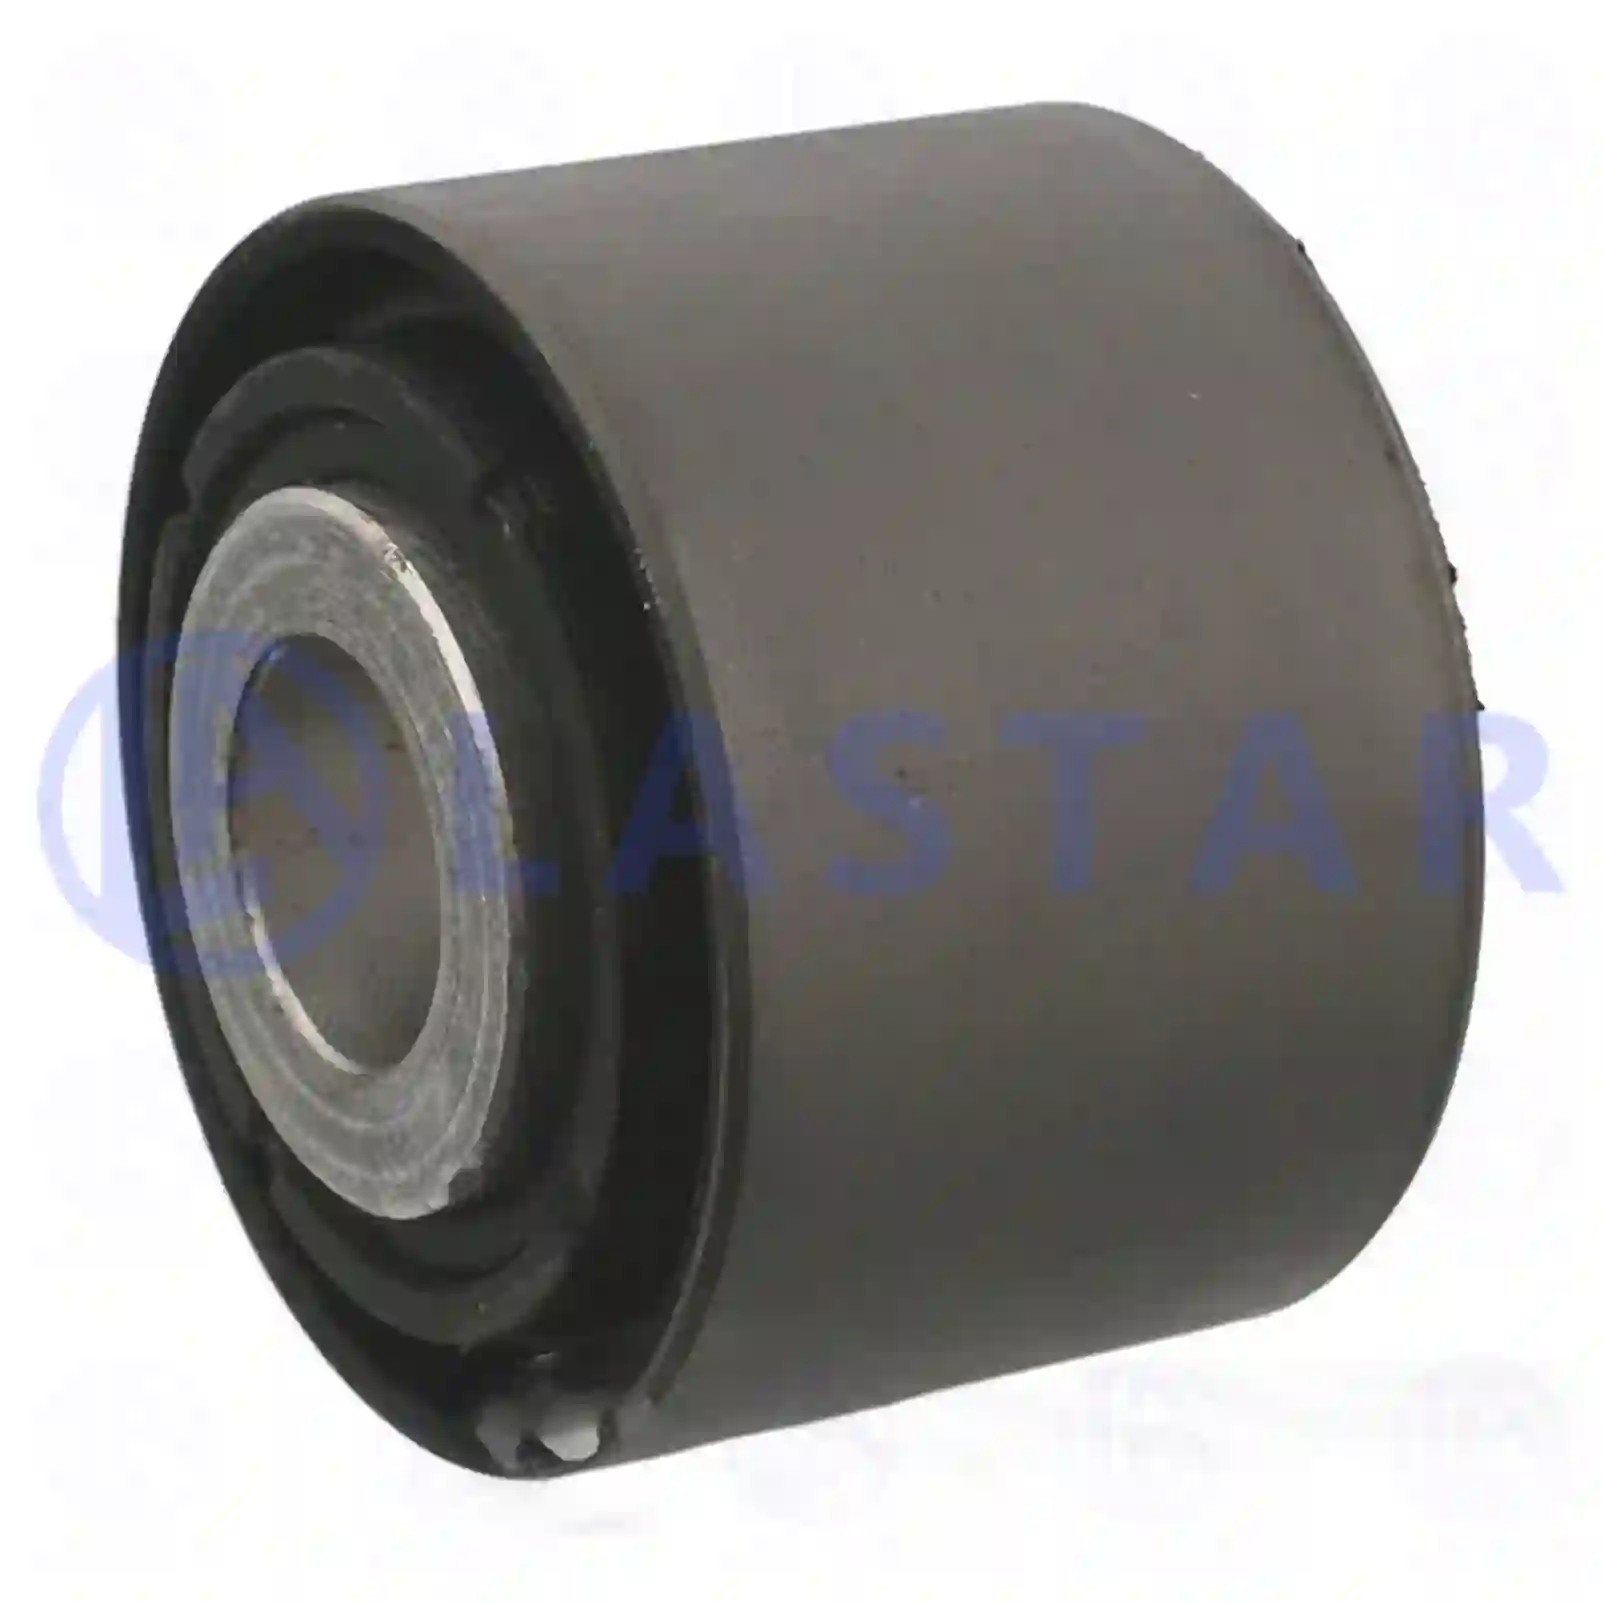 Rubber mounting, cabin stabilizer, 77735186, 0556652, 0756919, 1290794, 556652, 756919 ||  77735186 Lastar Spare Part | Truck Spare Parts, Auotomotive Spare Parts Rubber mounting, cabin stabilizer, 77735186, 0556652, 0756919, 1290794, 556652, 756919 ||  77735186 Lastar Spare Part | Truck Spare Parts, Auotomotive Spare Parts